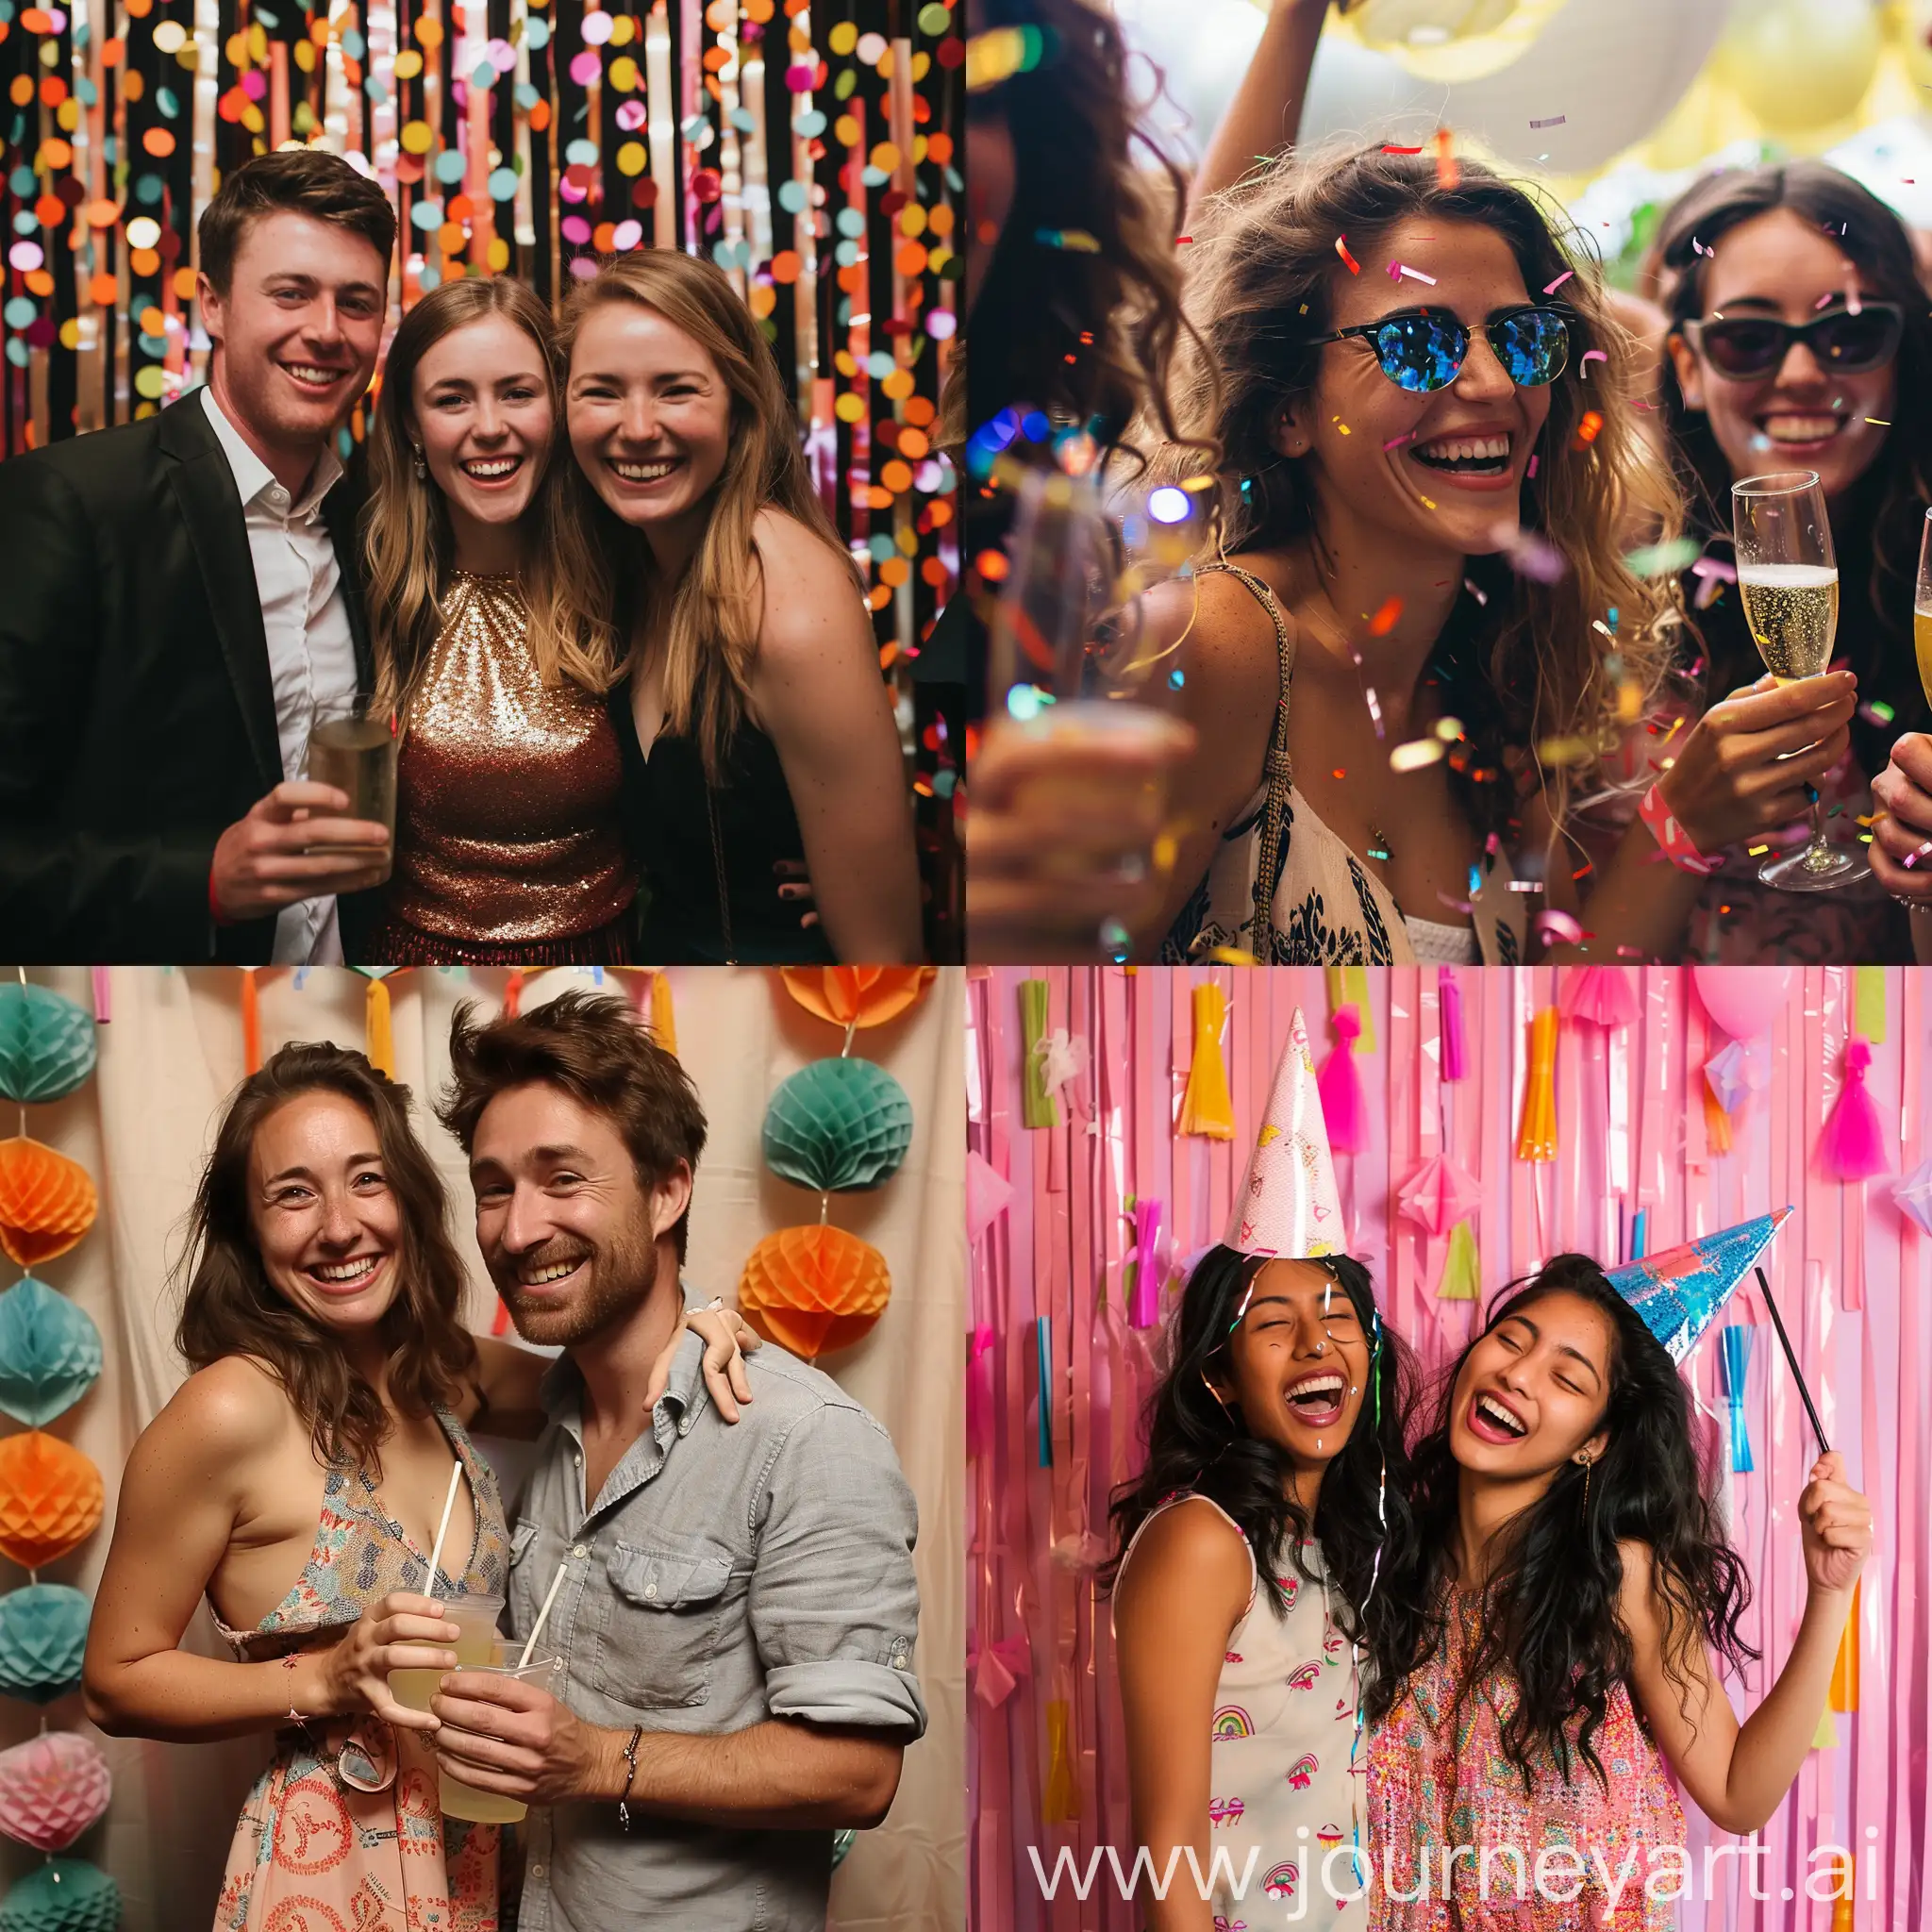 Vibrant-Party-Photo-with-Diverse-Guests-Celebrating-Joyously